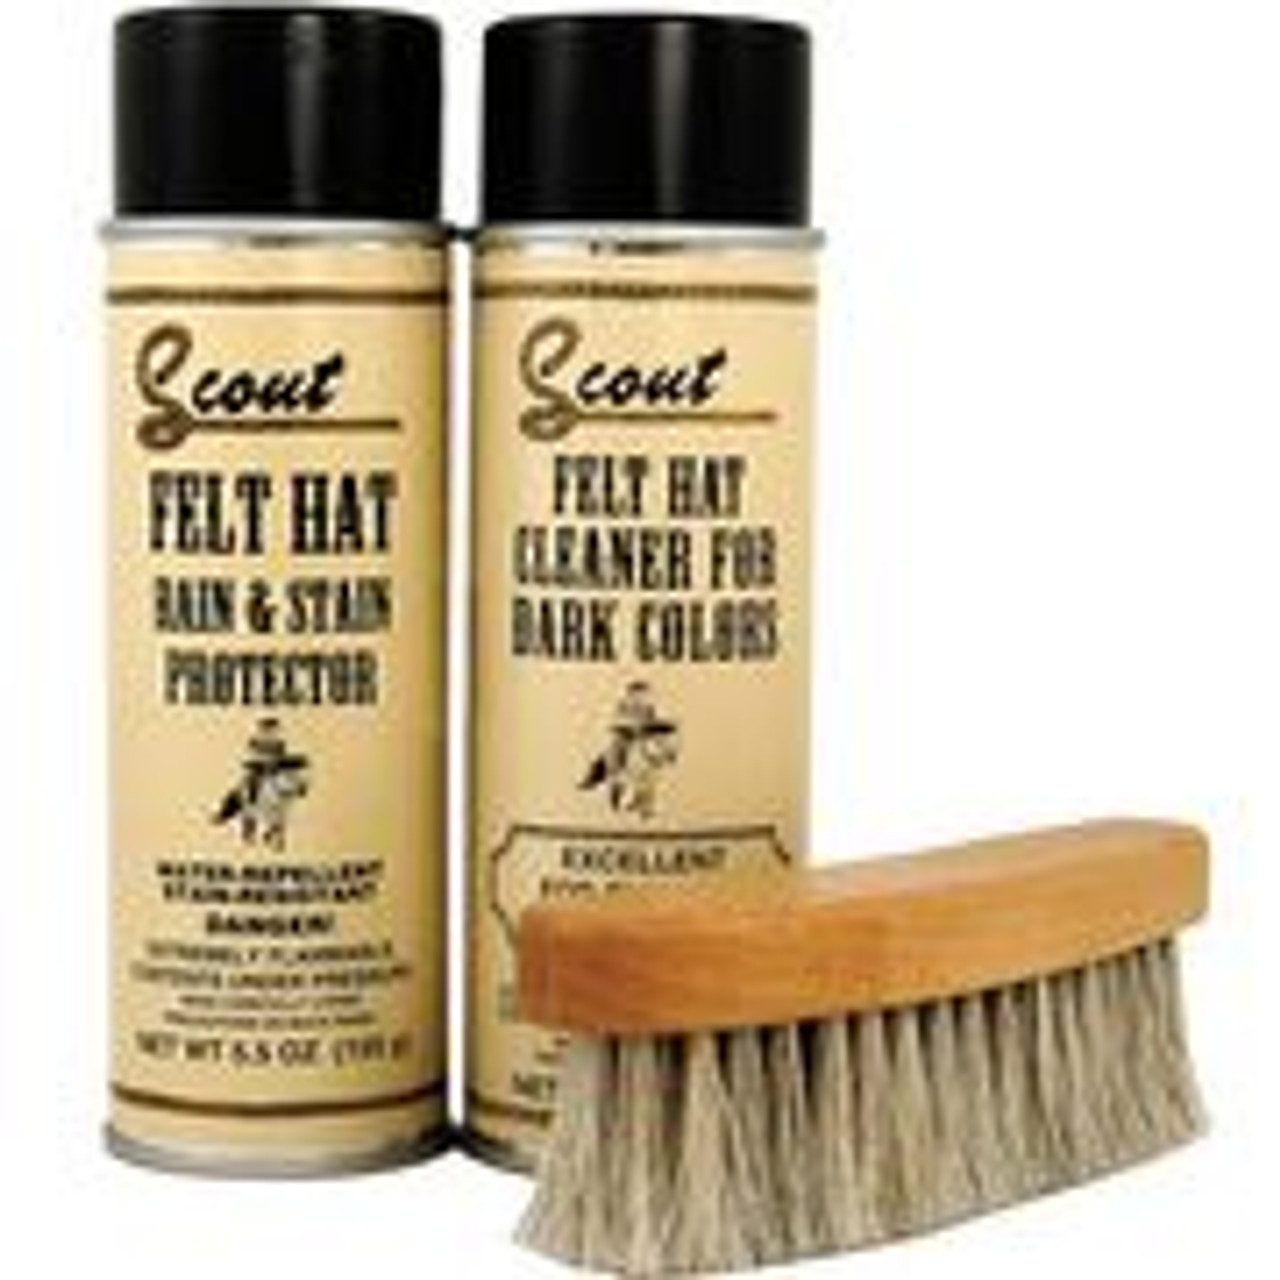 Scout Felt Hat Rain & Stain Protector